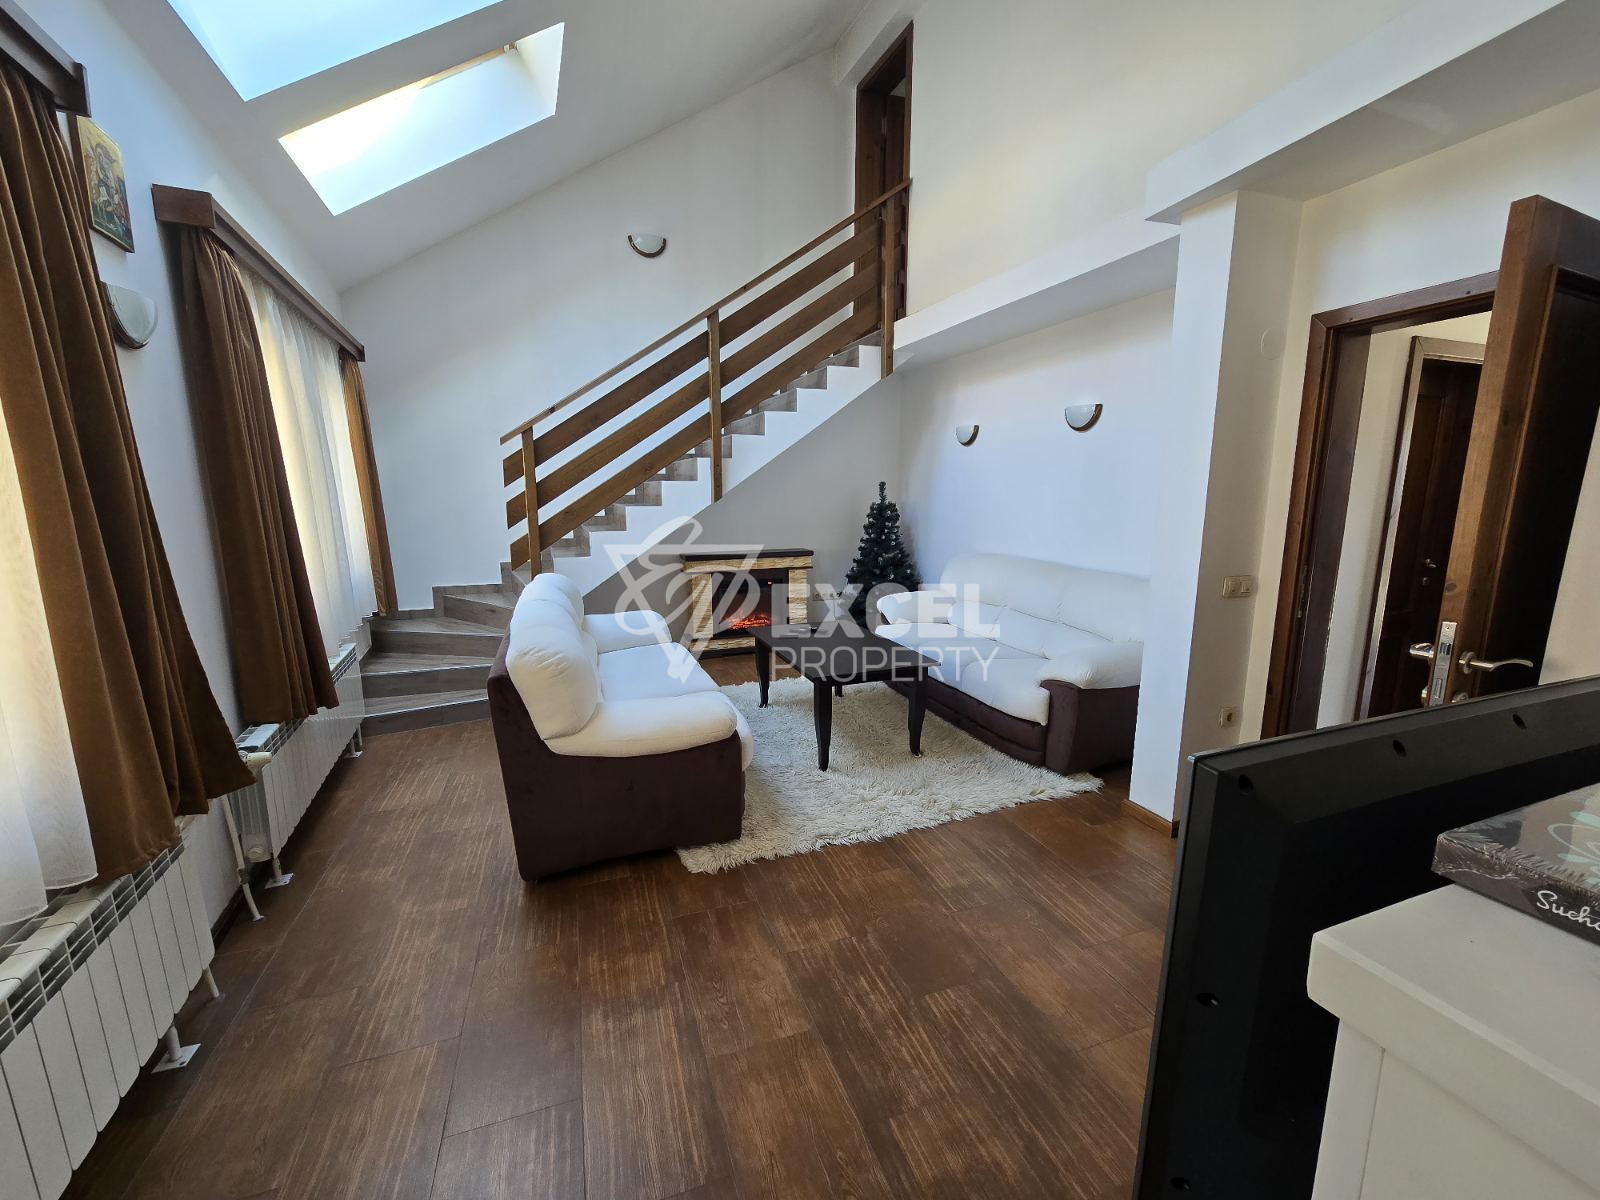 Multifunctional house with an active business in the TOP center of Bansko!